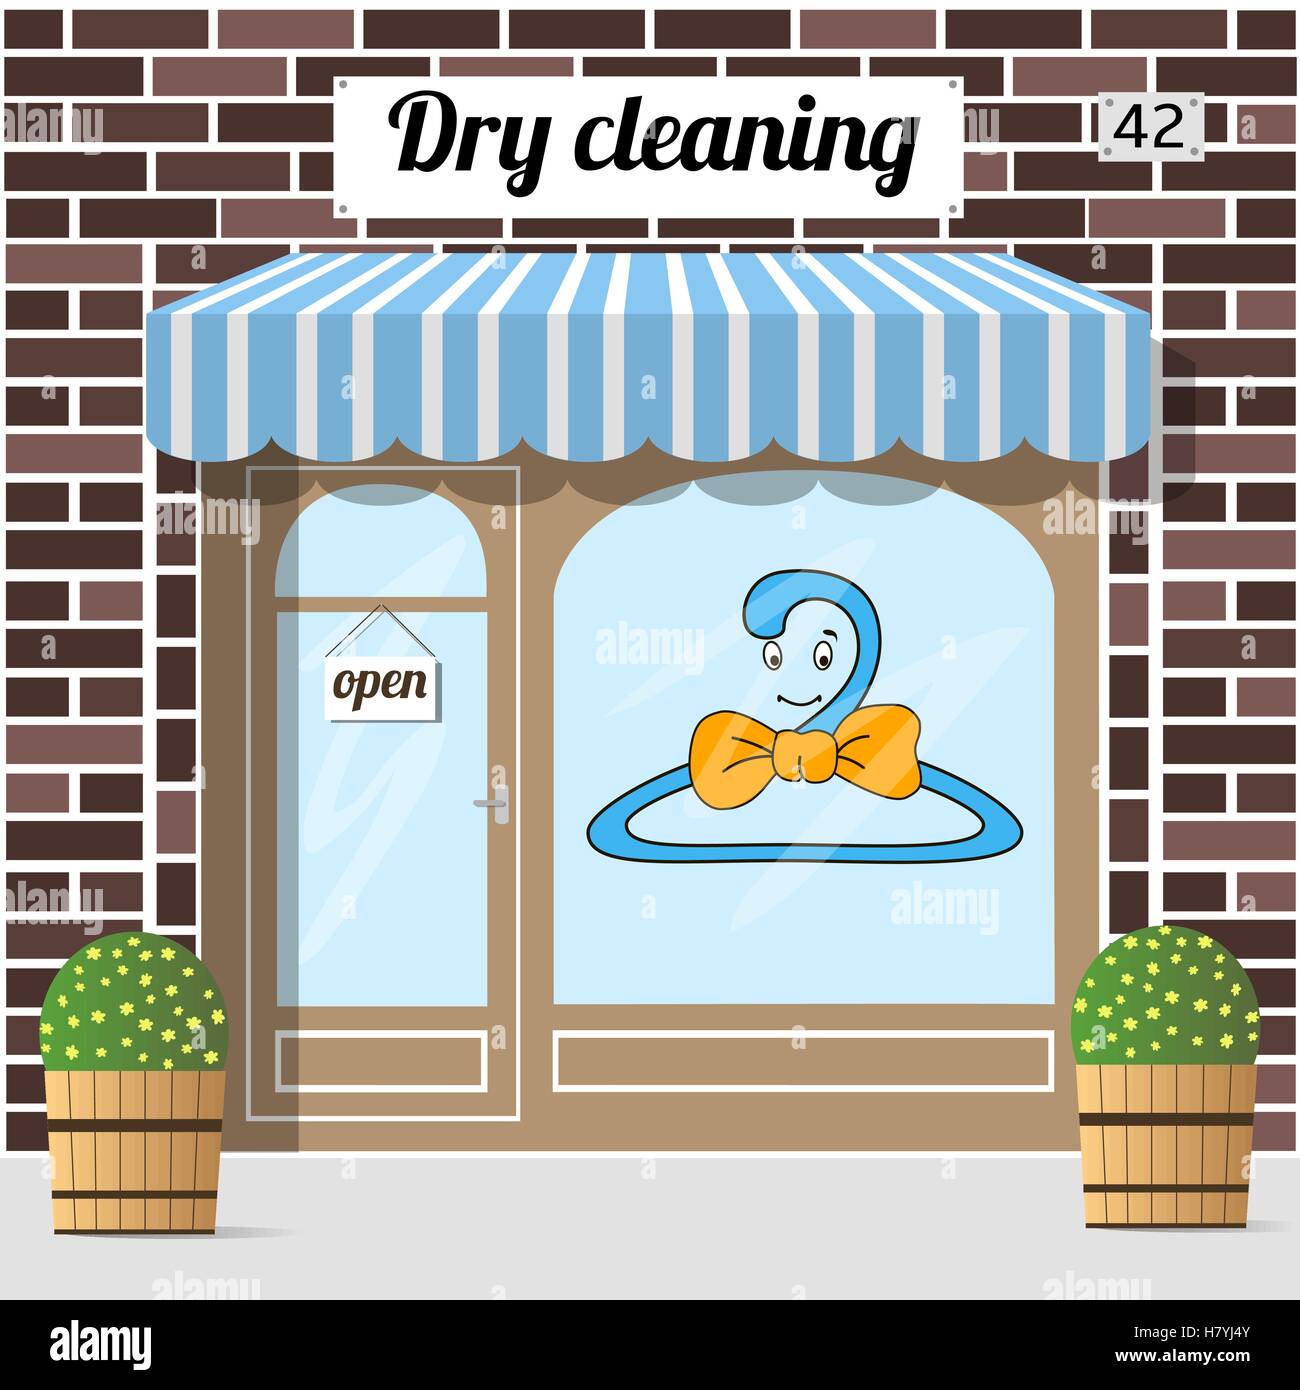 dry cleaning service Stock Vector